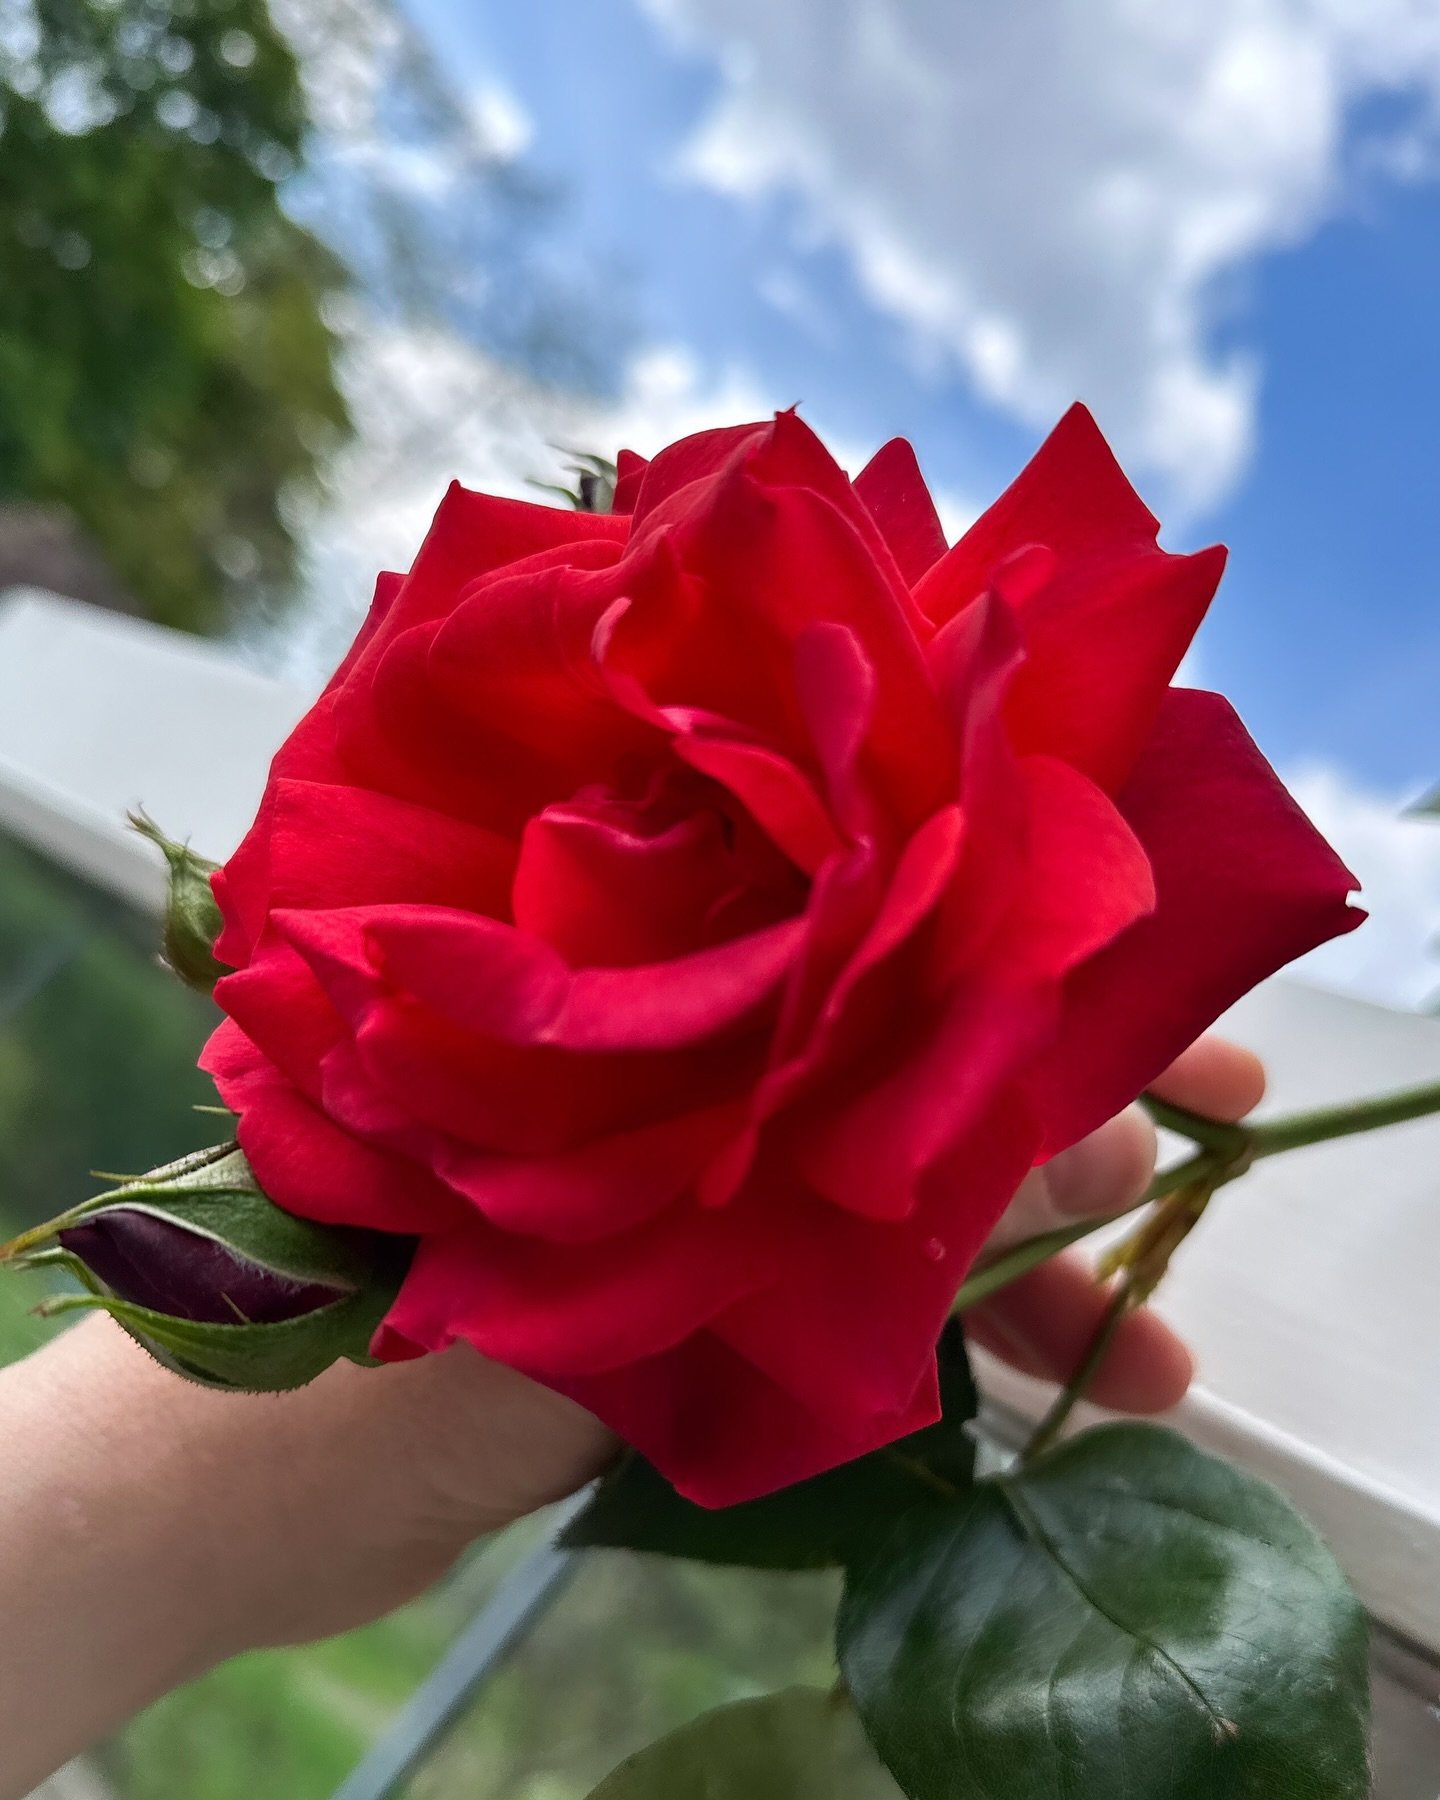 The first red rose of this year bloomed today 🌹Finally feeling a bit like the seasons are changing. Wanted to say a big Thank You to everyone who came along to The Maker Space over the long weekend to support not only myself but the fabulous venue a